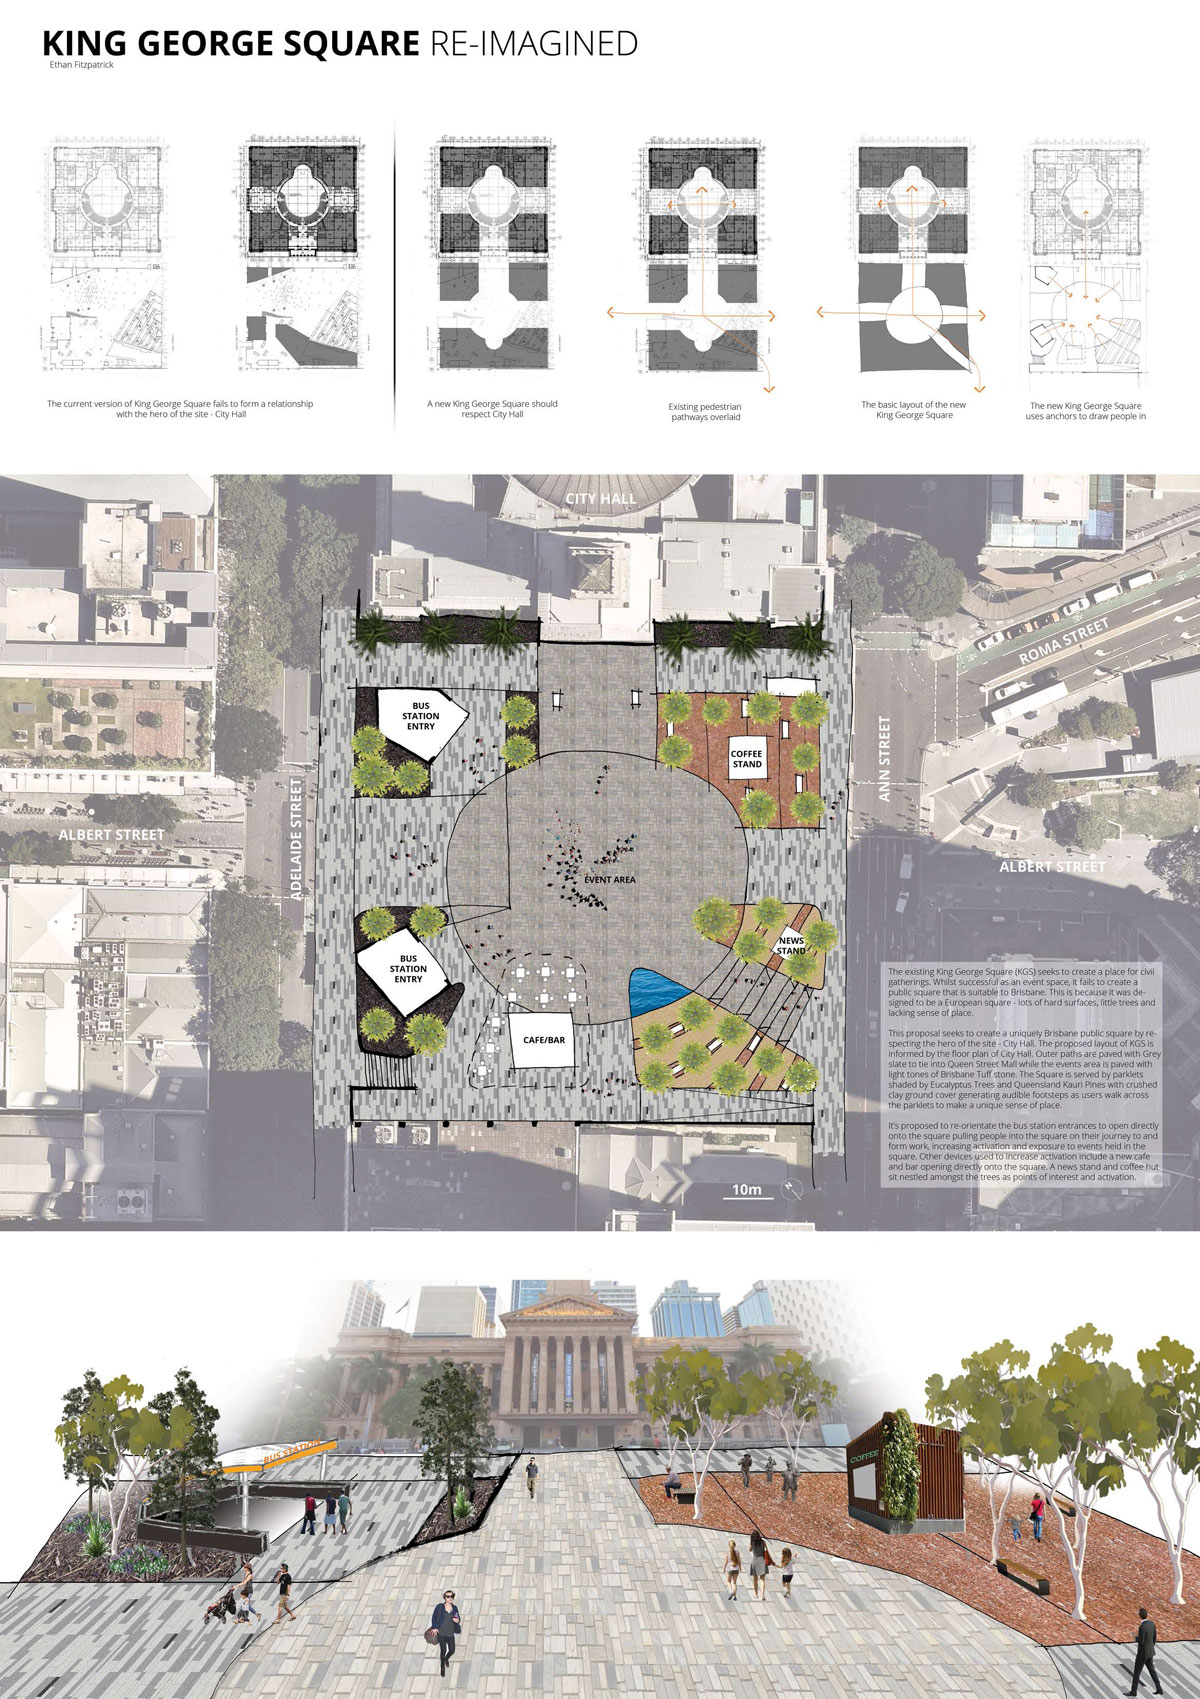 Ethan Fitzpatrick's Respecting City Hall design idea for King George Square